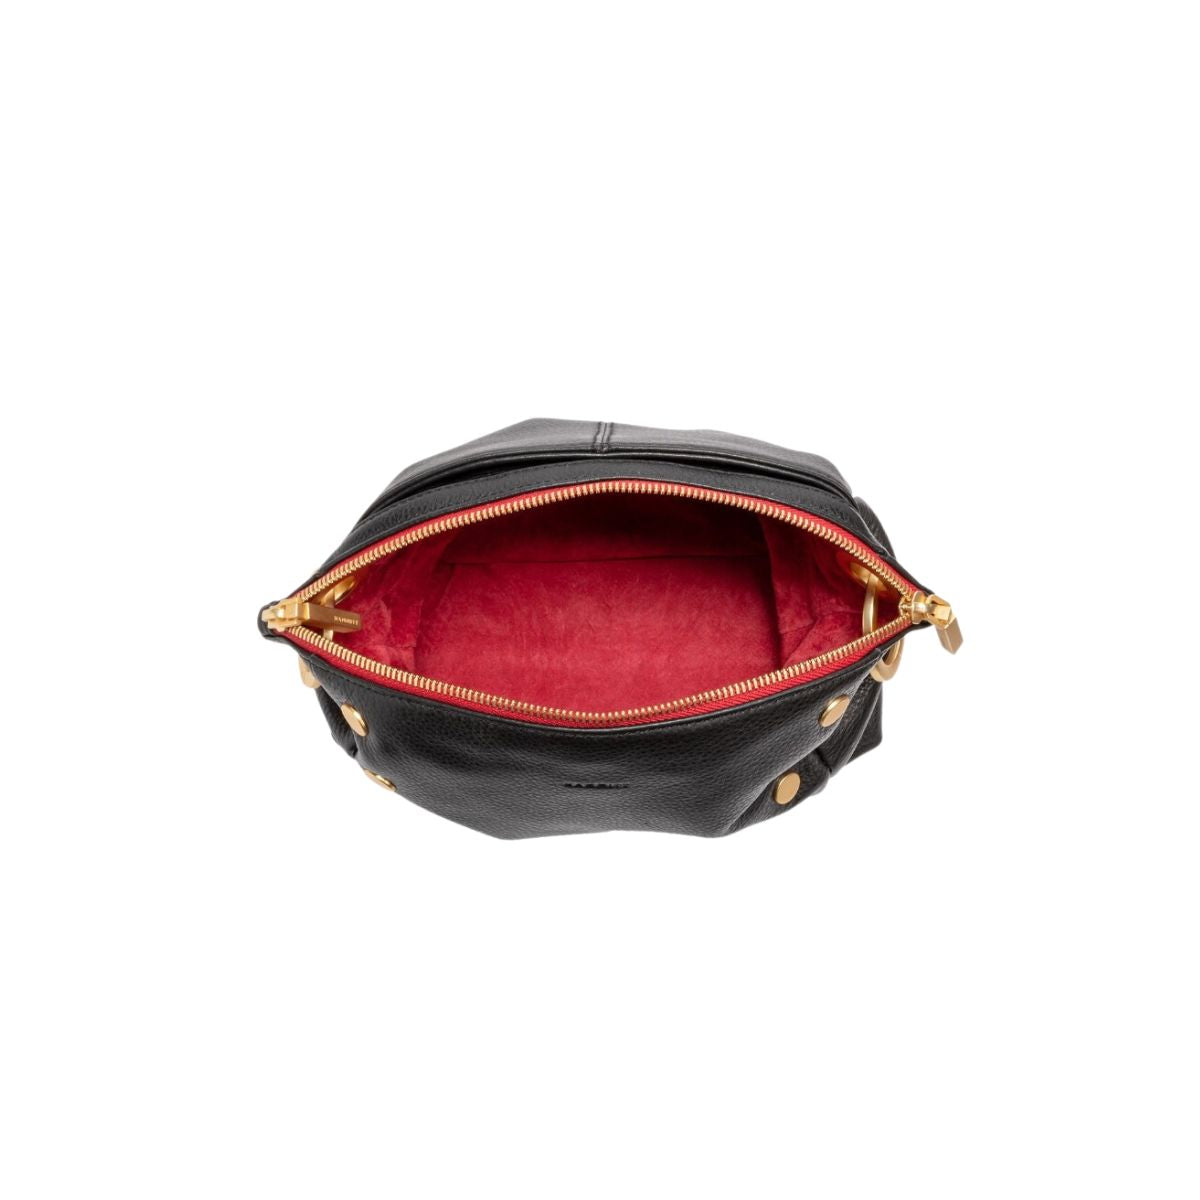 Hammitt Daniel Crossbody Clutch Small in Black with Brushed Gold & Red Zip